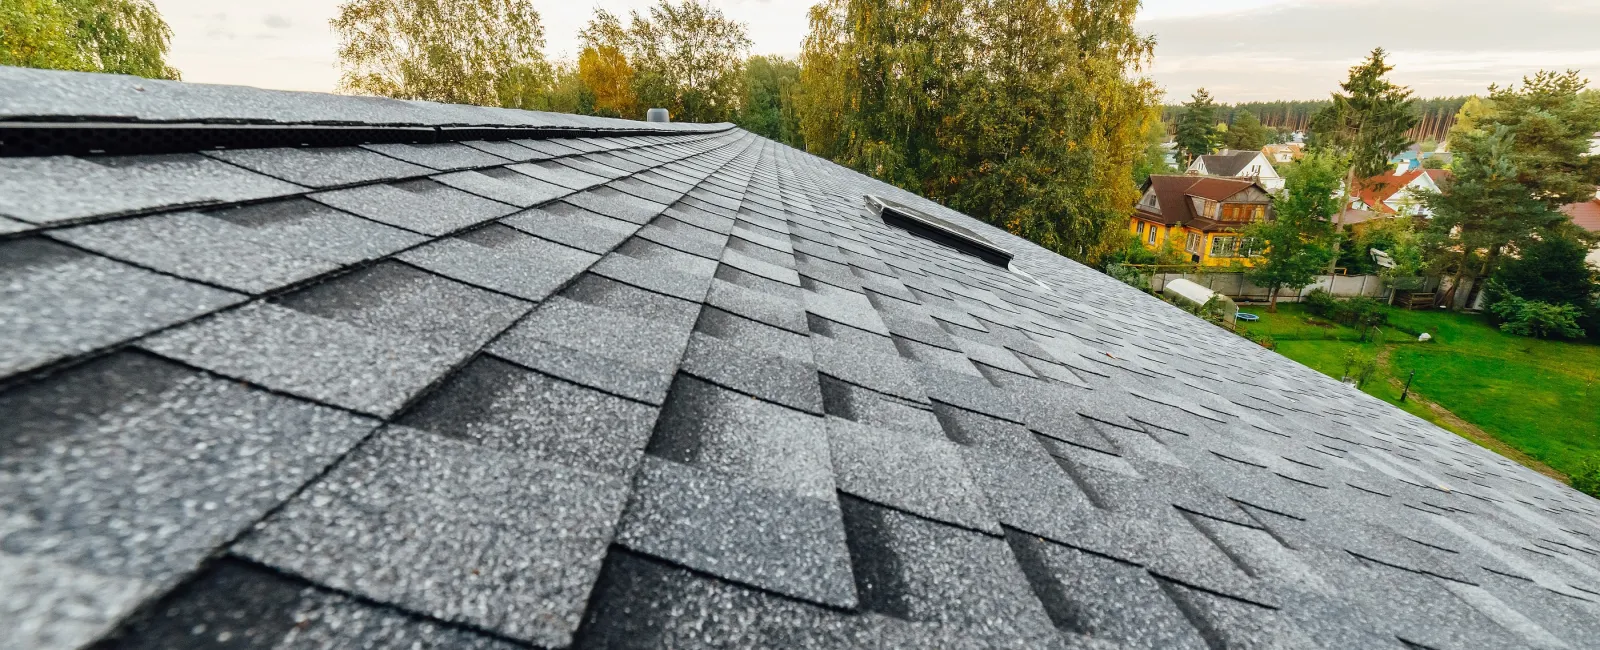 The Characteristics of Good Roofing in Your Home